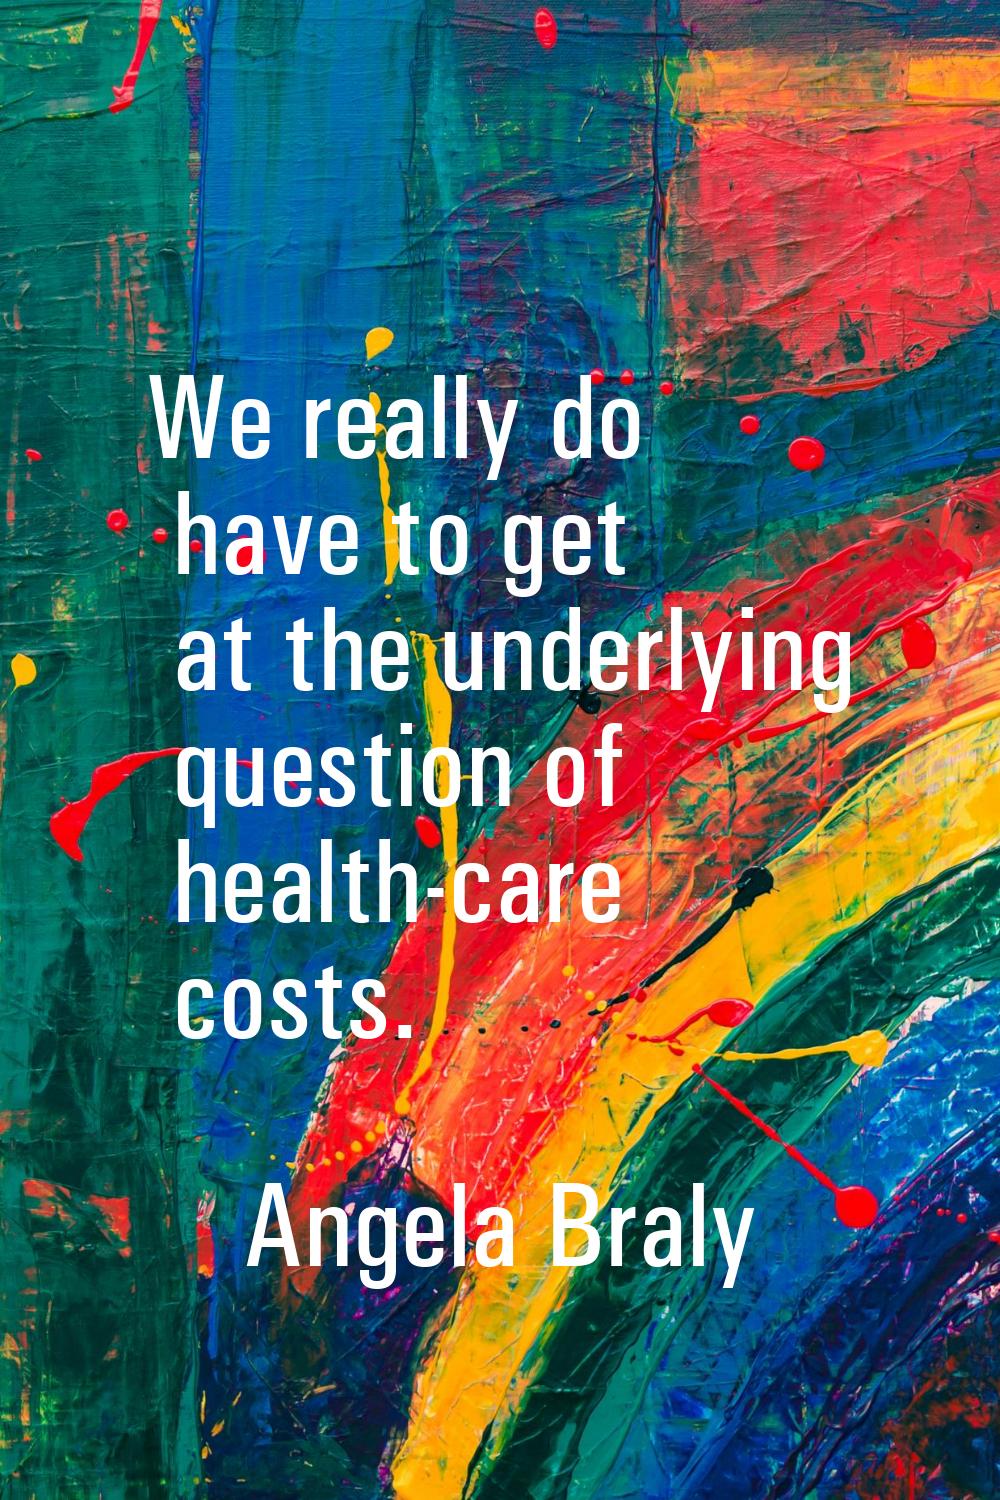 We really do have to get at the underlying question of health-care costs.